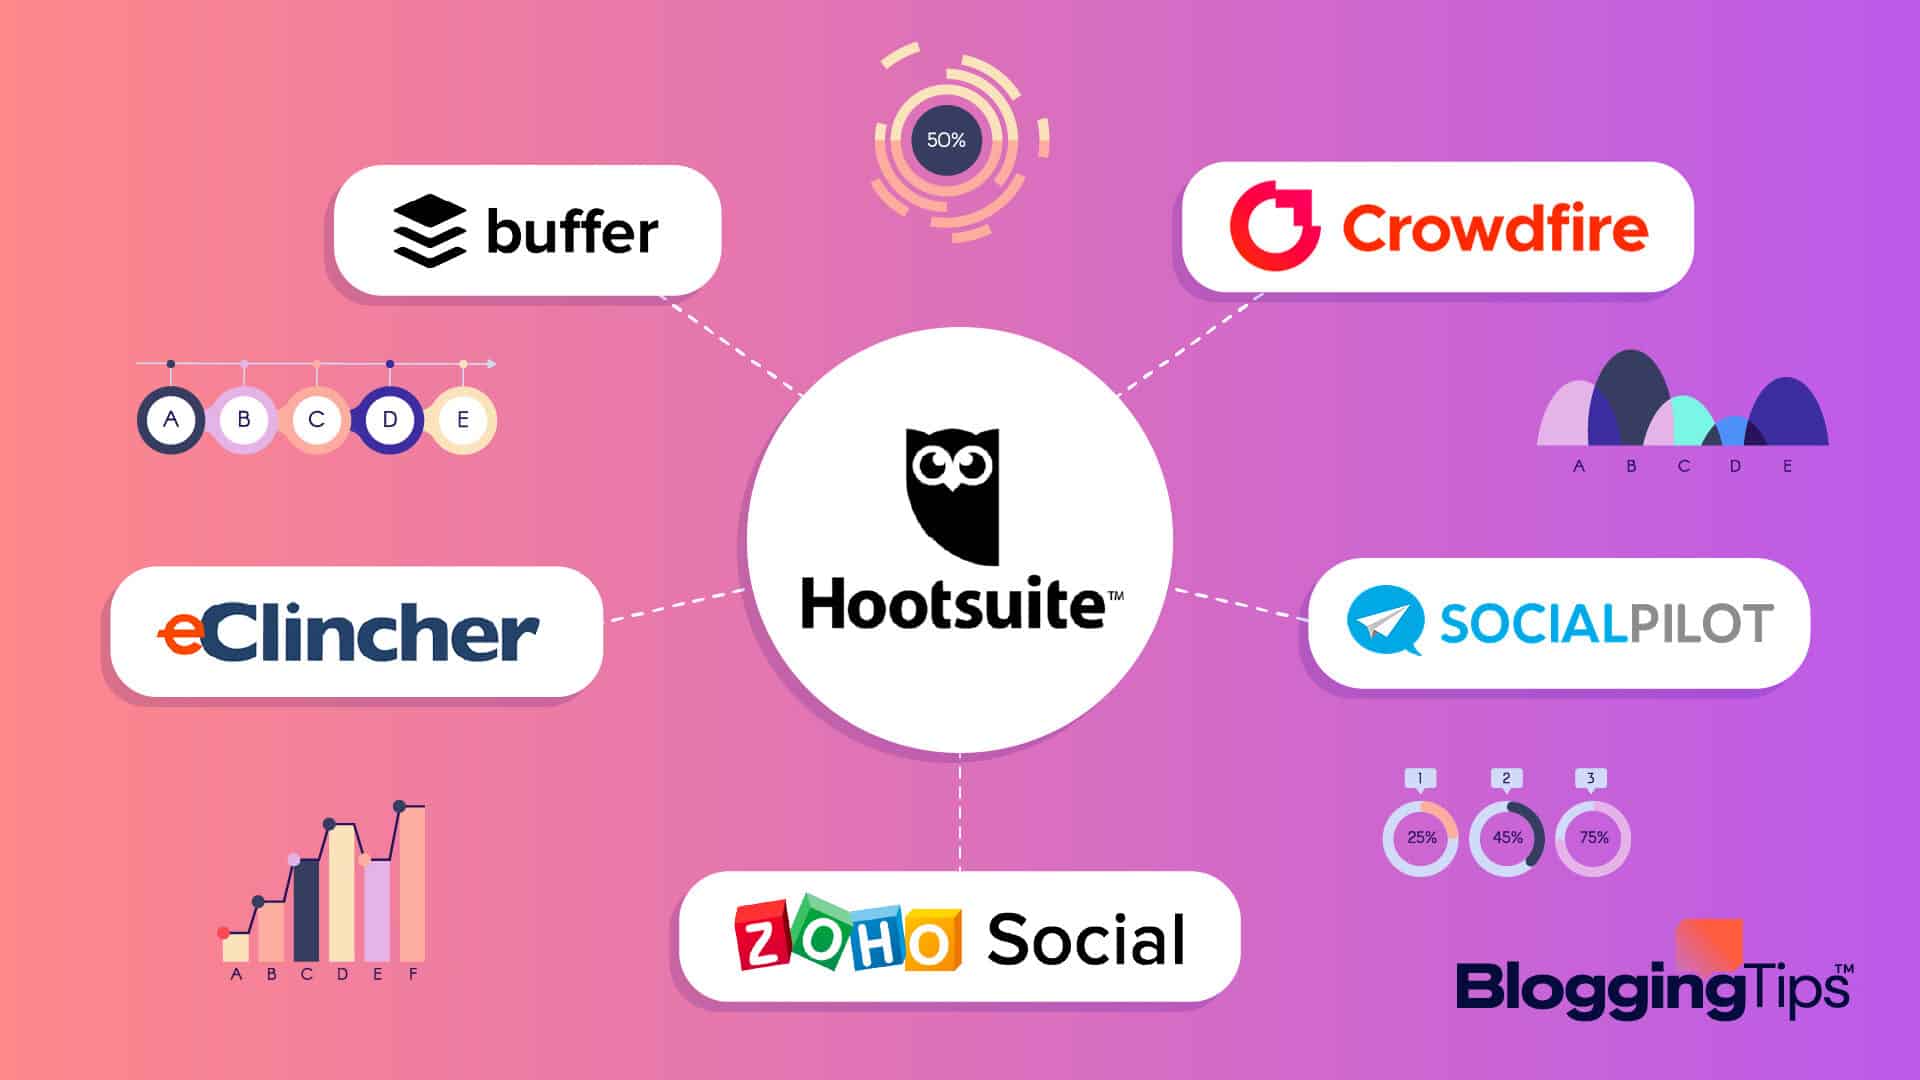 vector graphic showing an illustration of hootsuite alternatives logos side by side